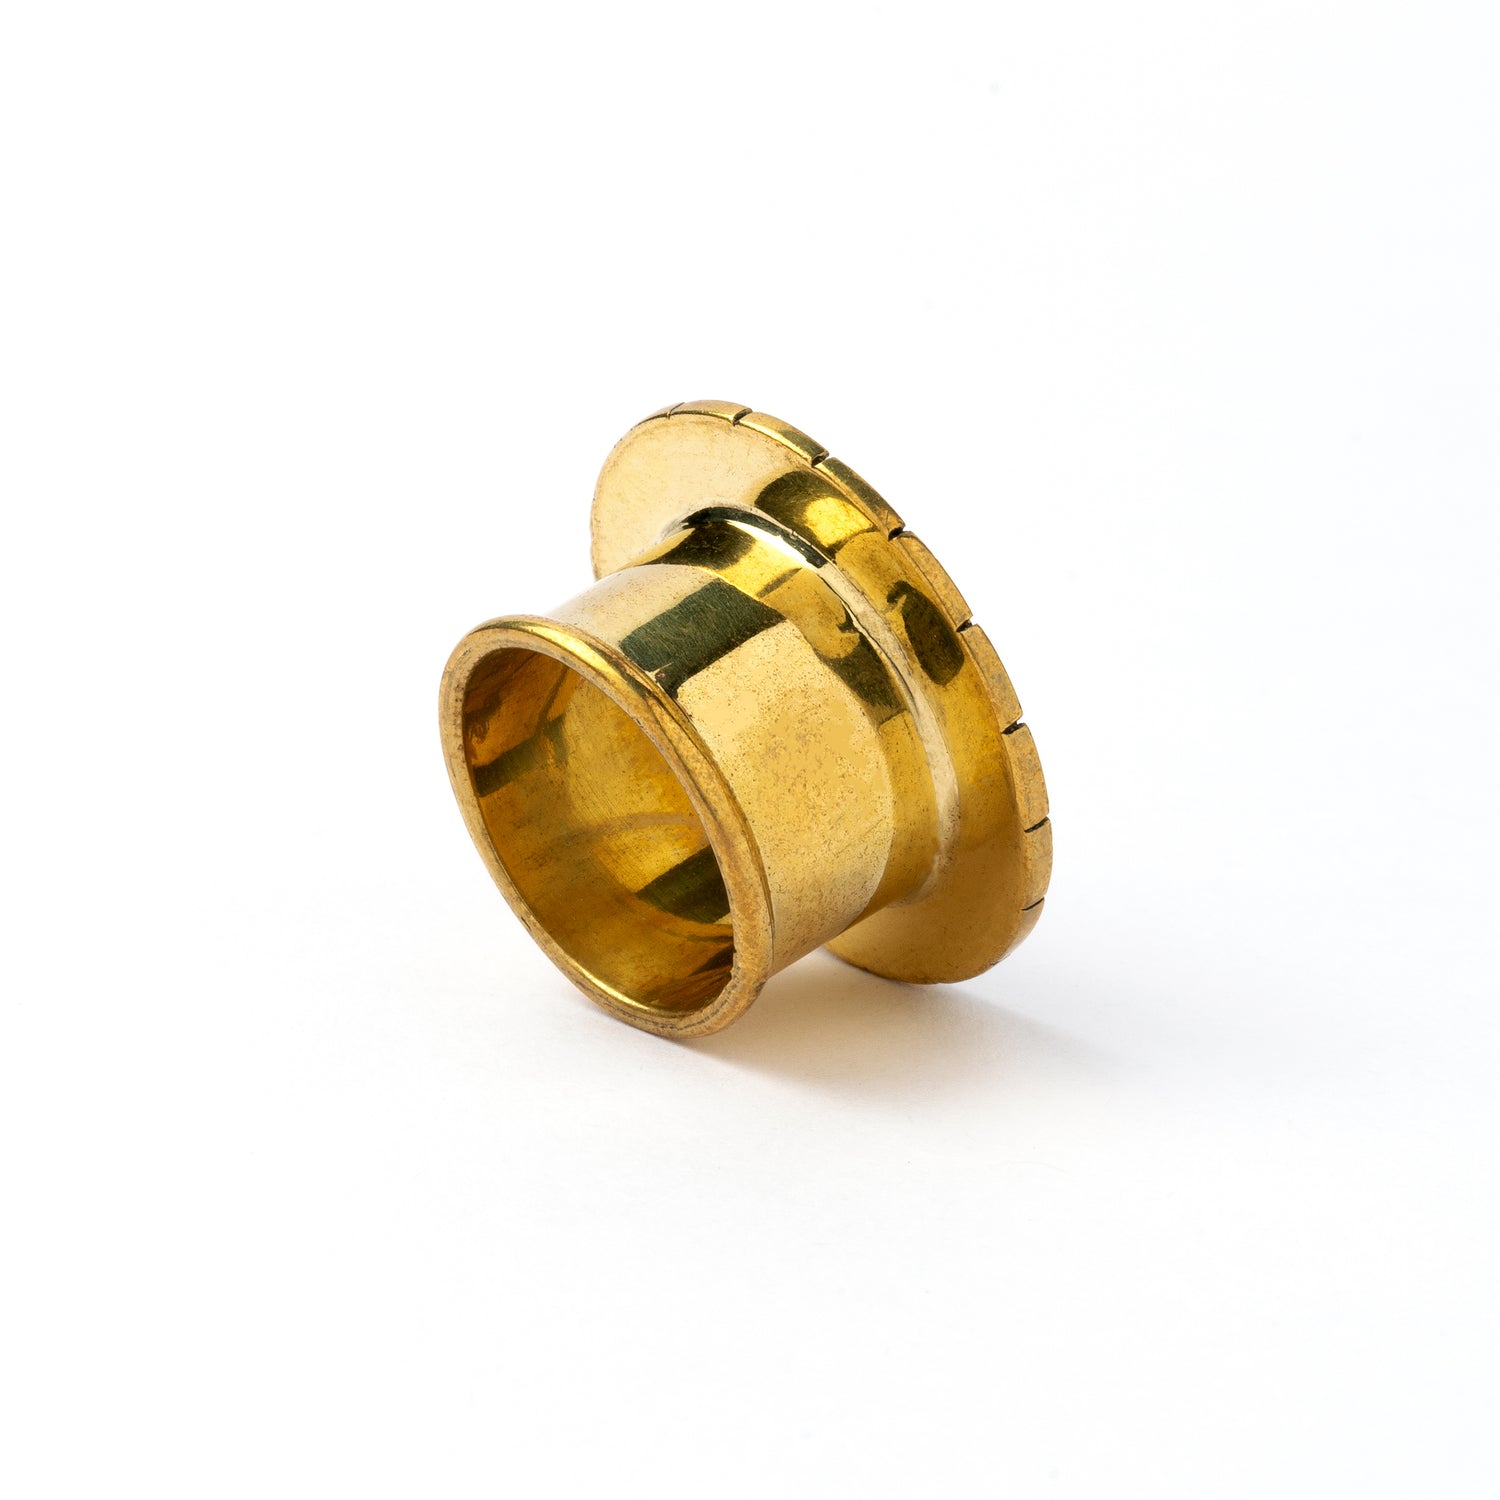 Honeycomb golden brass flesh tunnel for stretched ears back side view